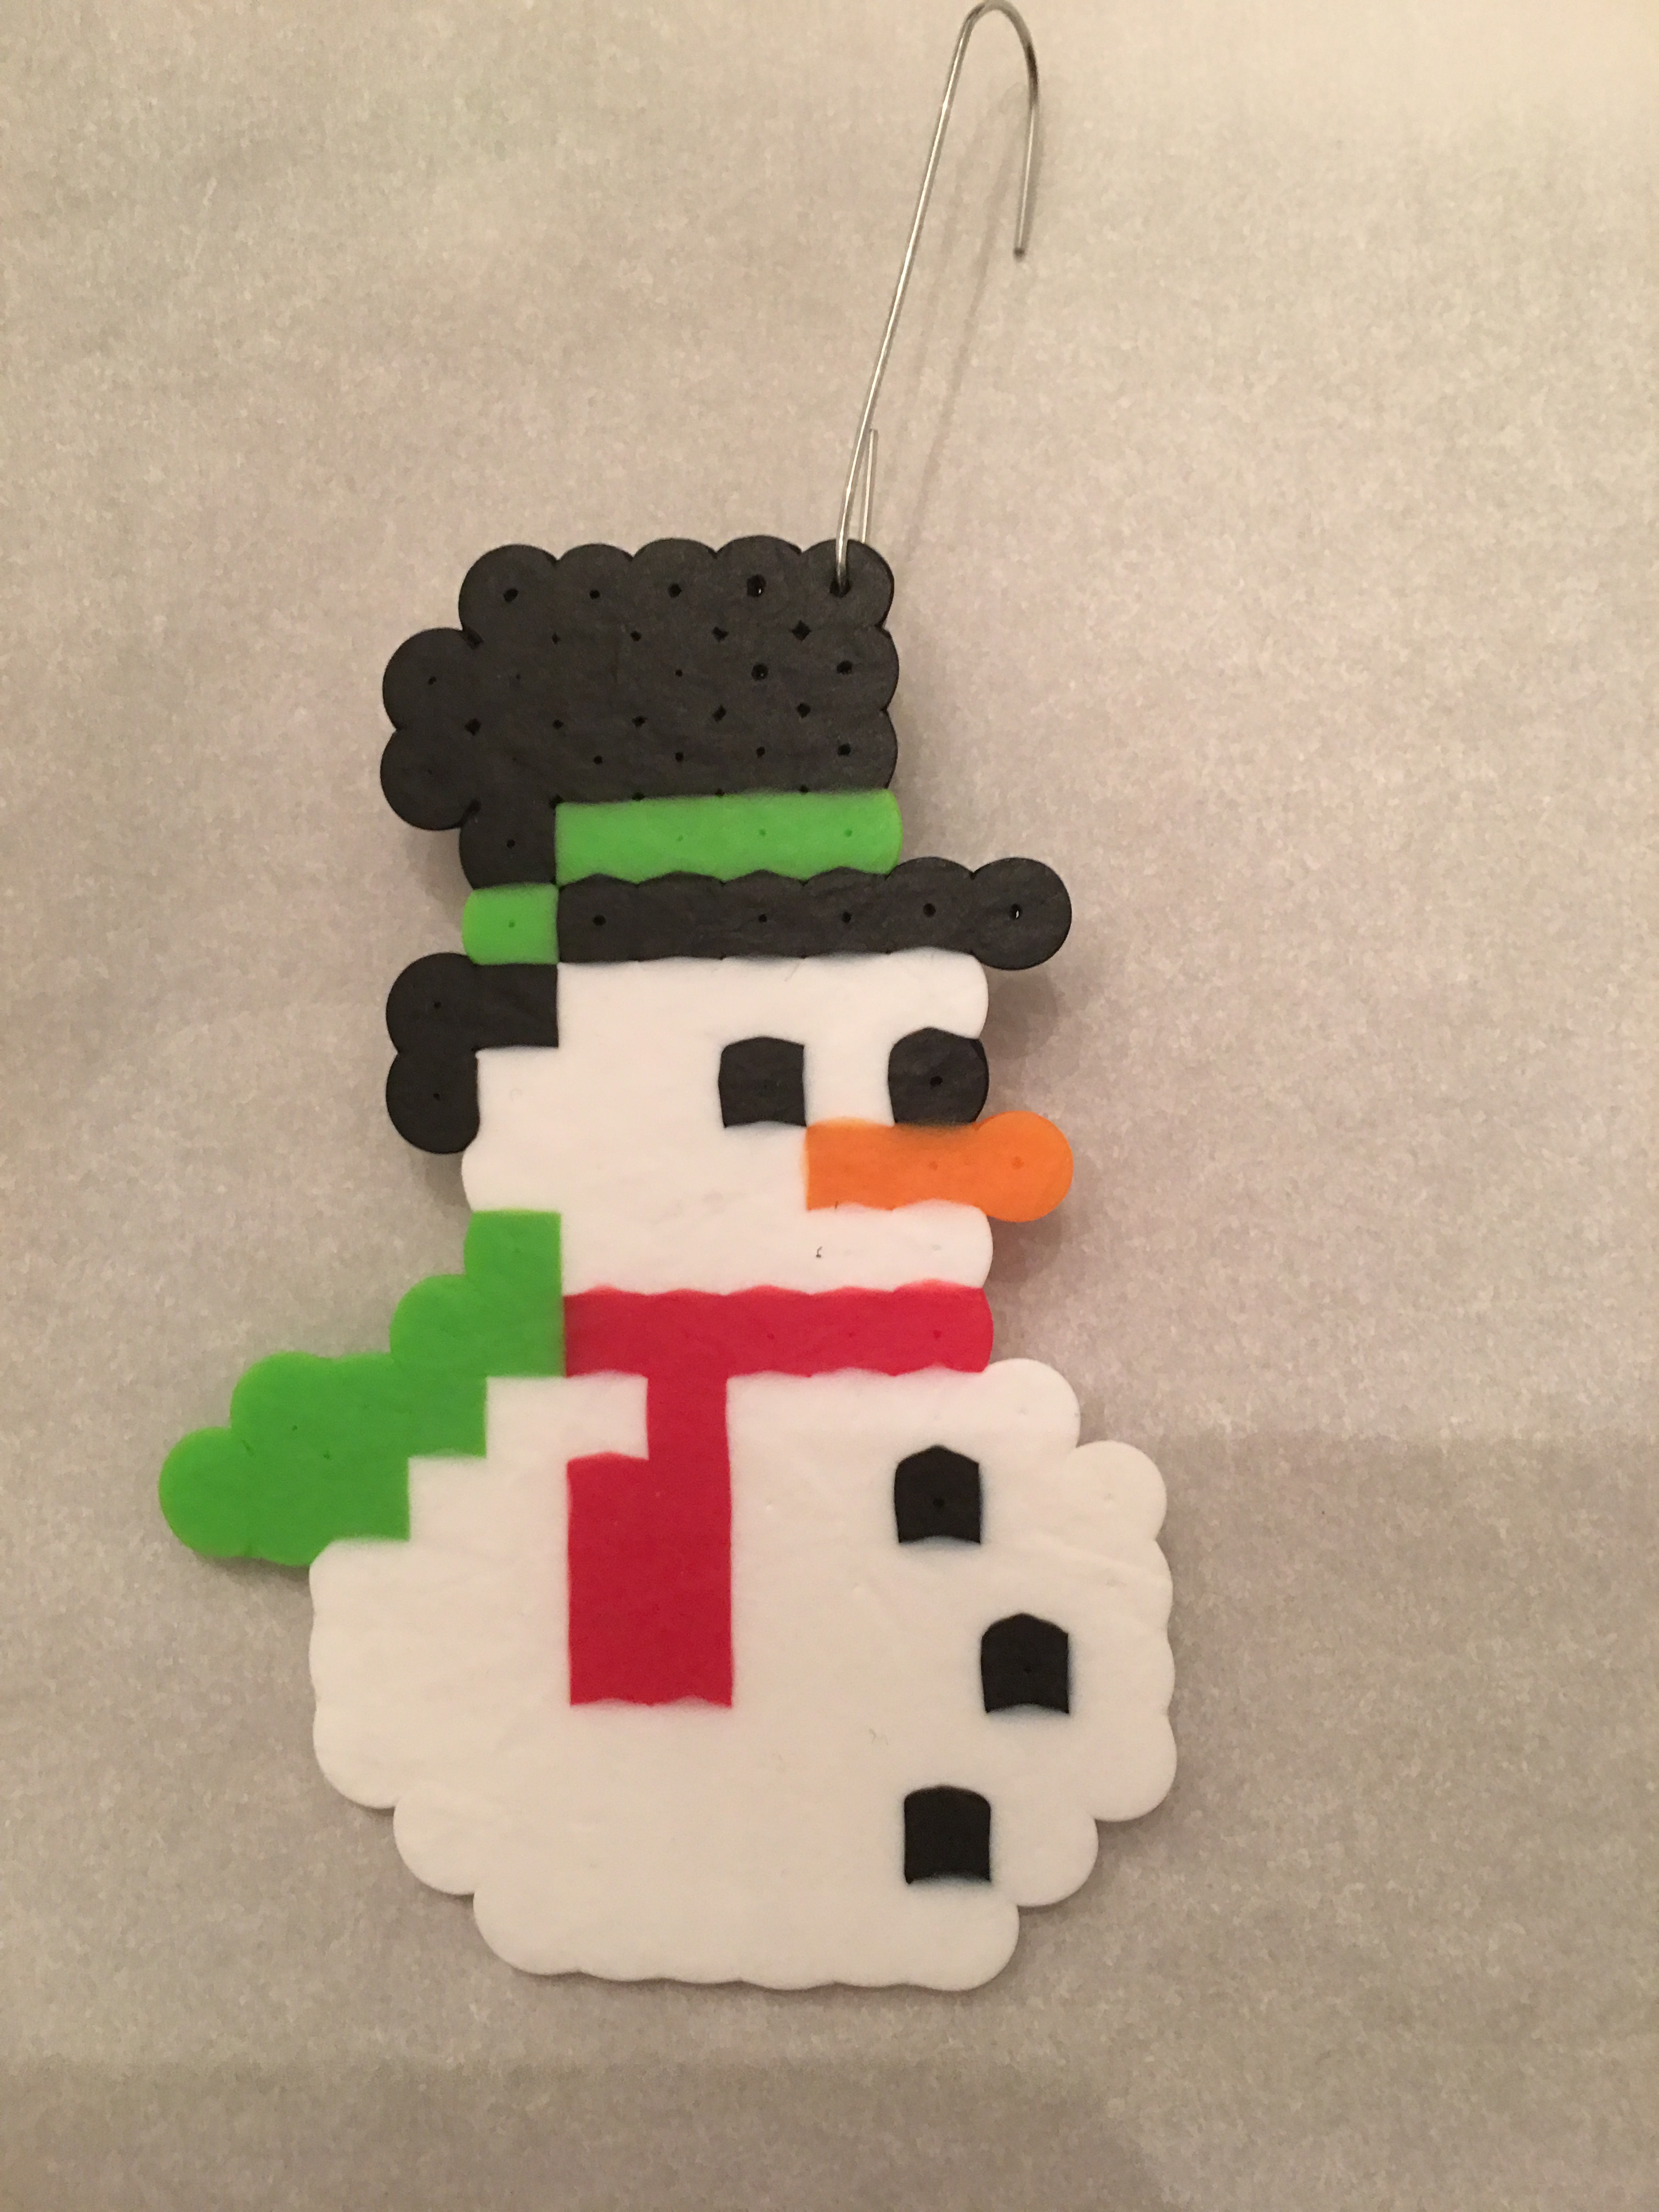 Snowman Christmas Ornament made with Perler beads